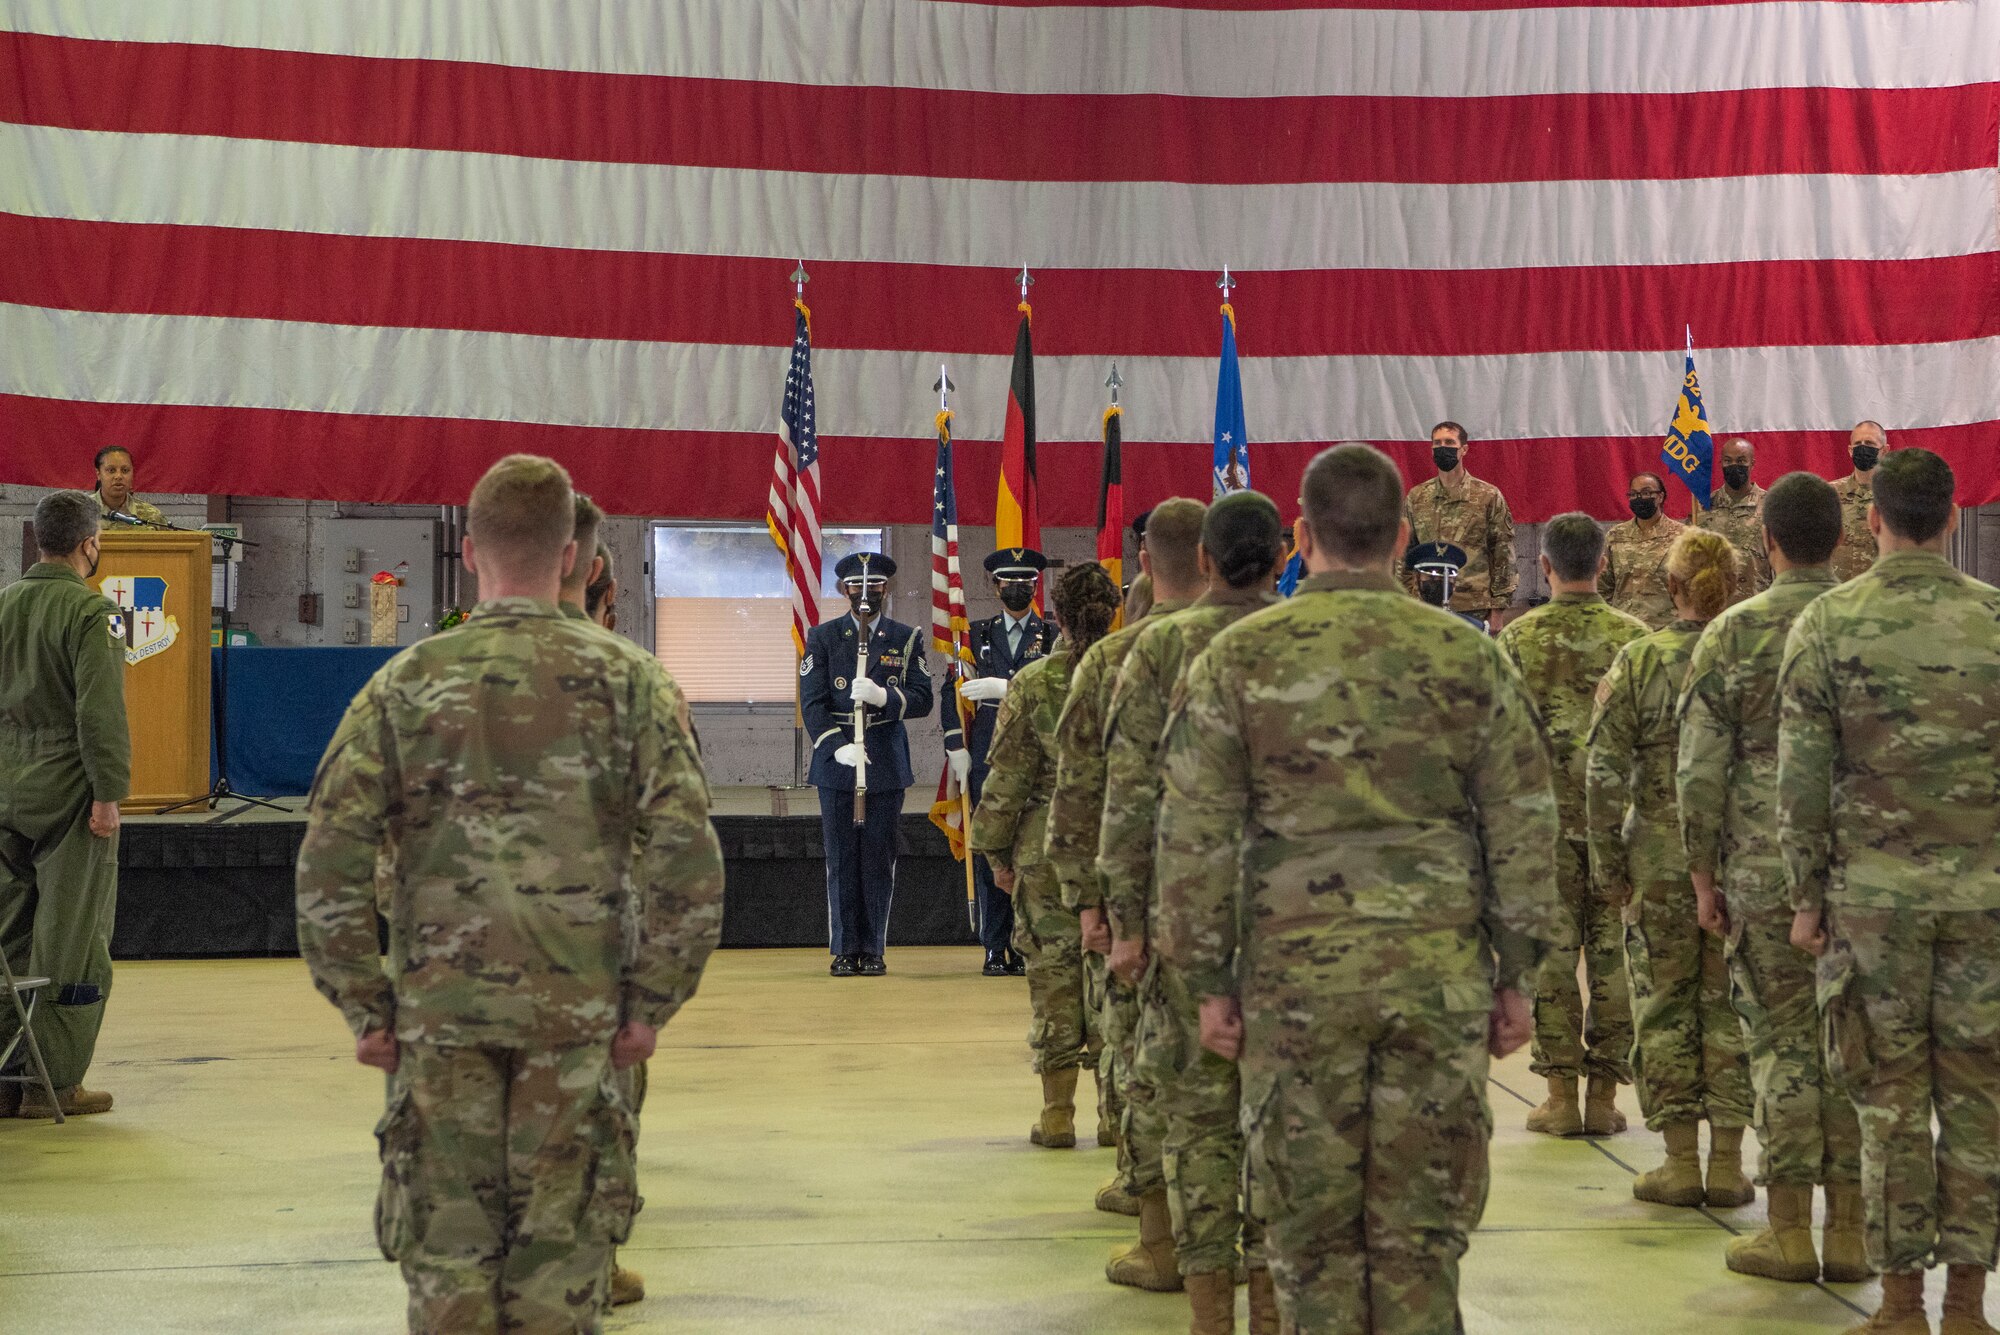 U.S. Air Force members of the 52nd Medical Group stand at attention for the Presentation of Colors during the 52nd MDG change of command ceremony June 30, 2021, on Spangdahlem Air Base, Germany. The 52nd MDG provides medical and dental services to nearly 9,500 beneficiaries at Spangdahlem Air Base and its four geographically separated units. (U.S. Air Force photo by Tech. Sgt. Anthony Plyler)